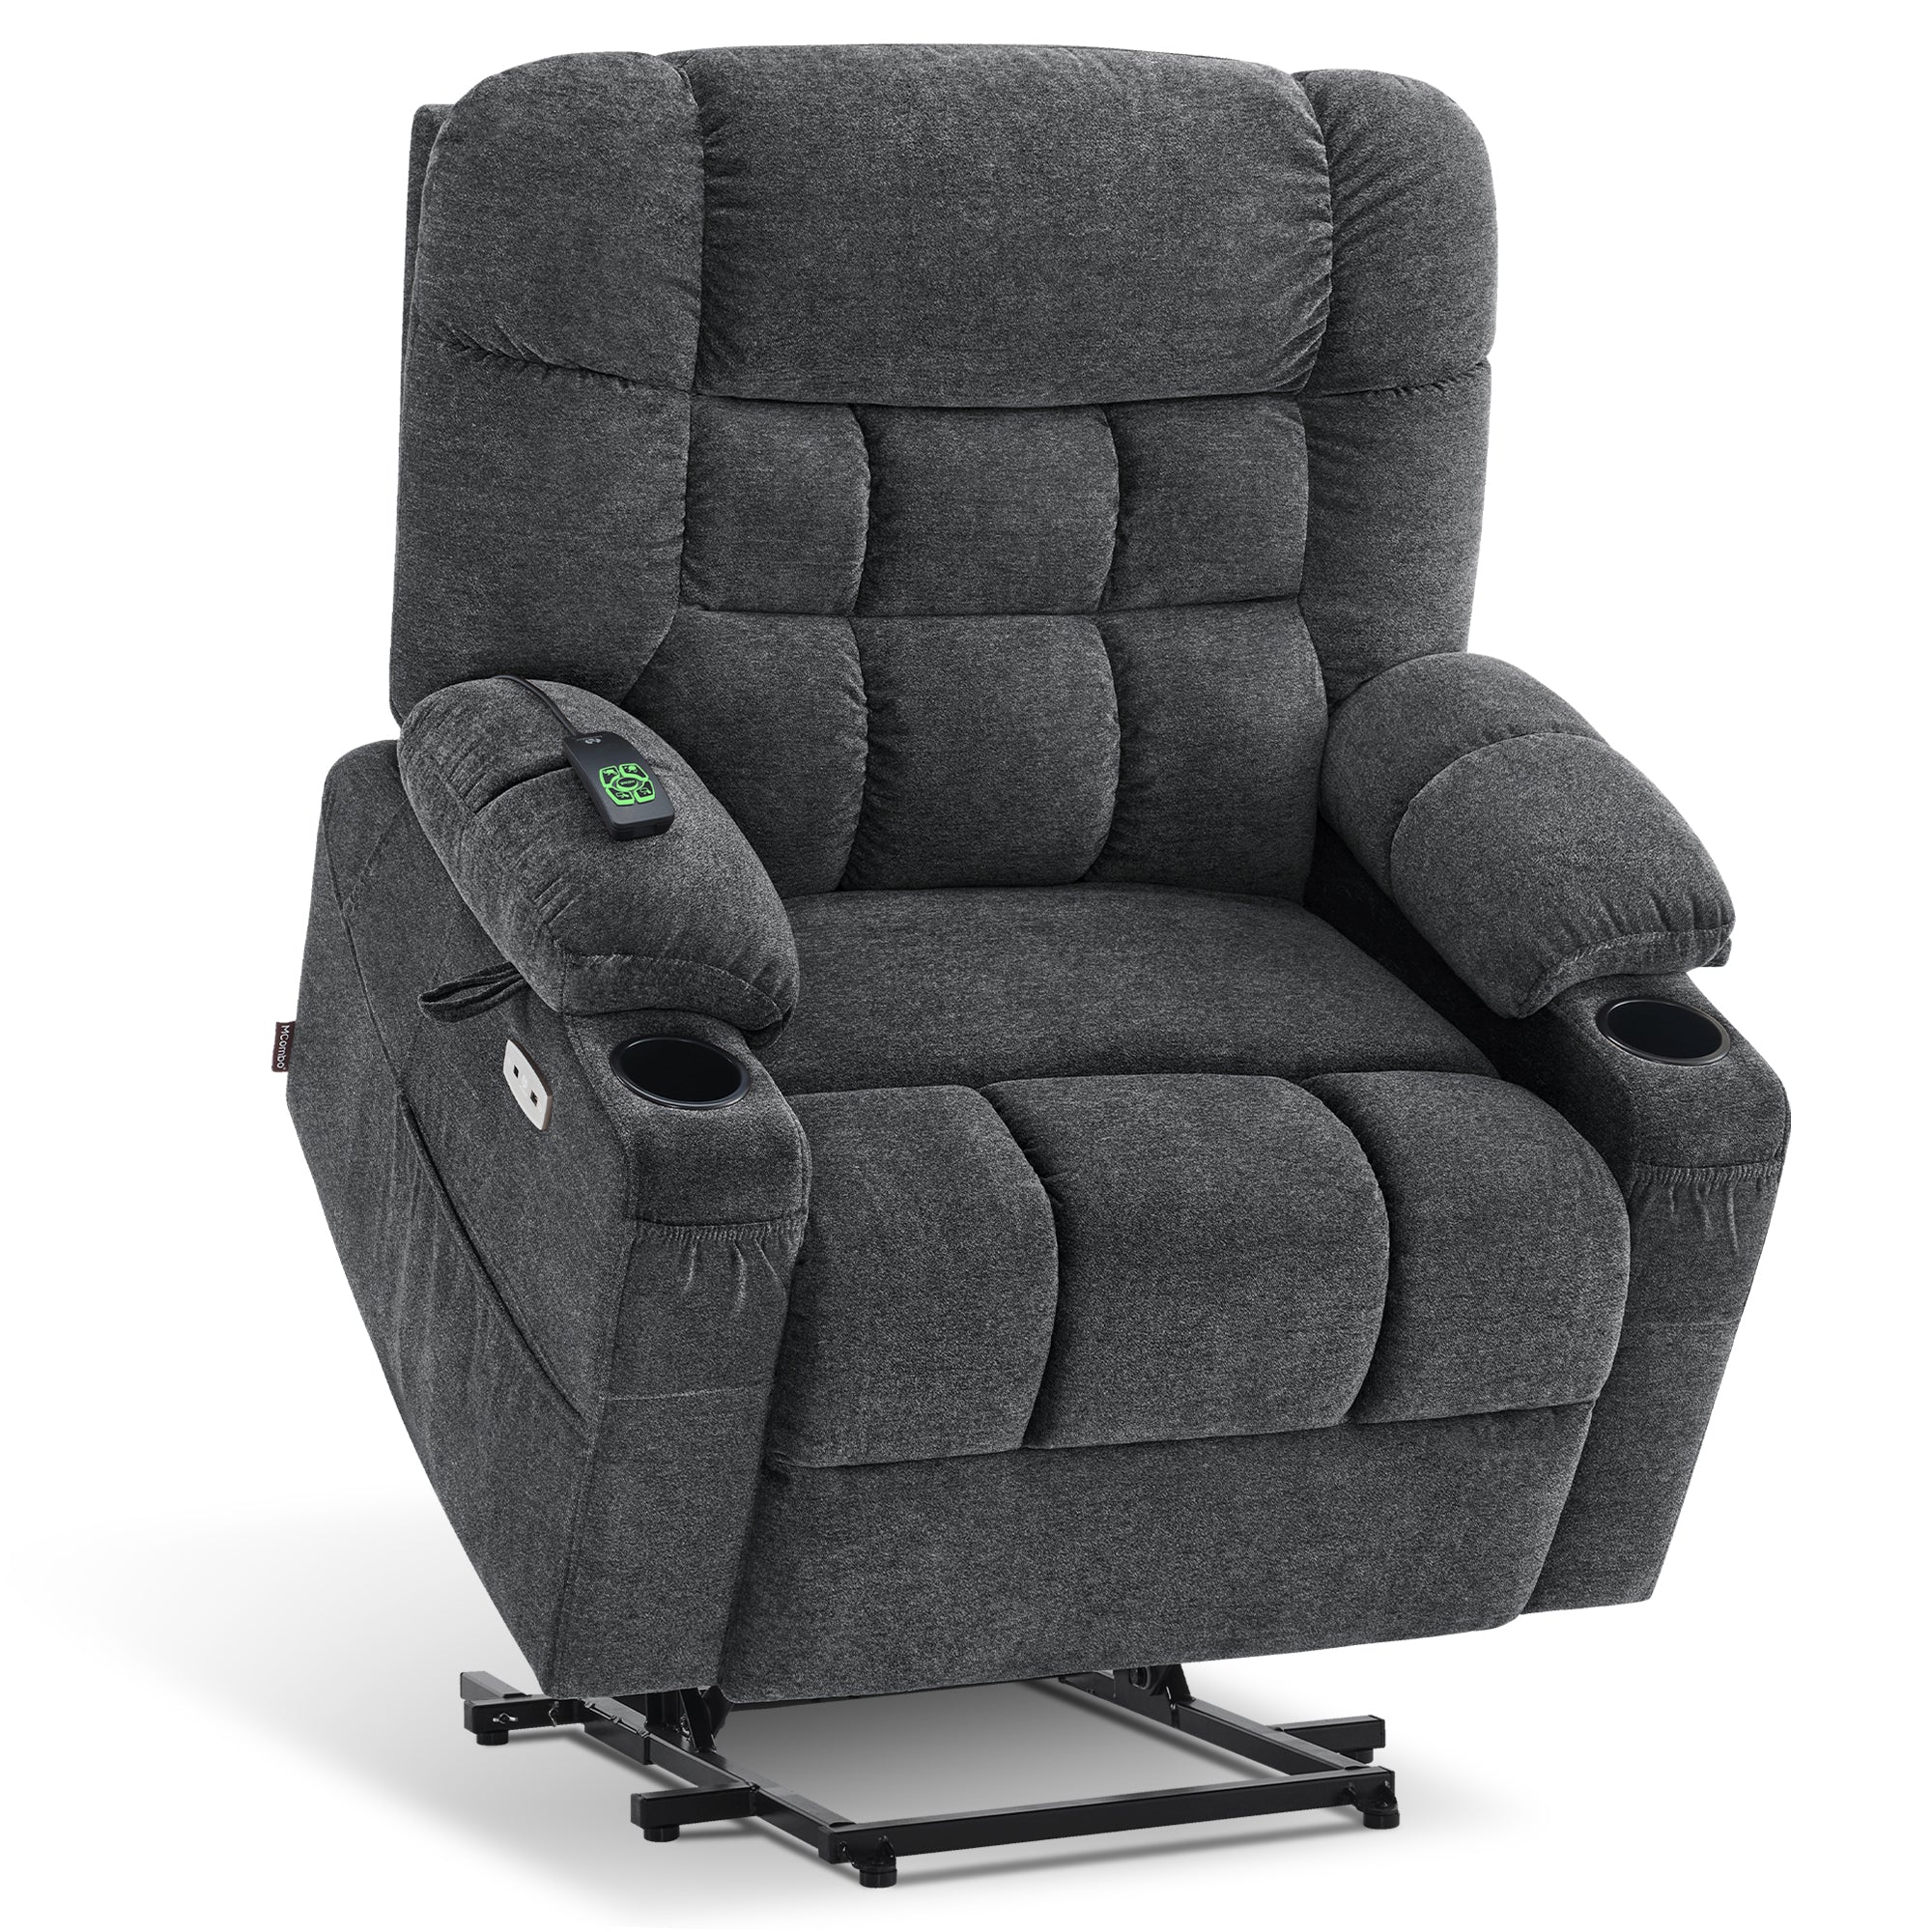 MCombo Dual Motor Power Lift Recliner Chair Sofa with Massage and Dual Heating for Elderly People, Infinite Position, USB&Type-C Ports, Fabric R7070 (Medium-Wide)